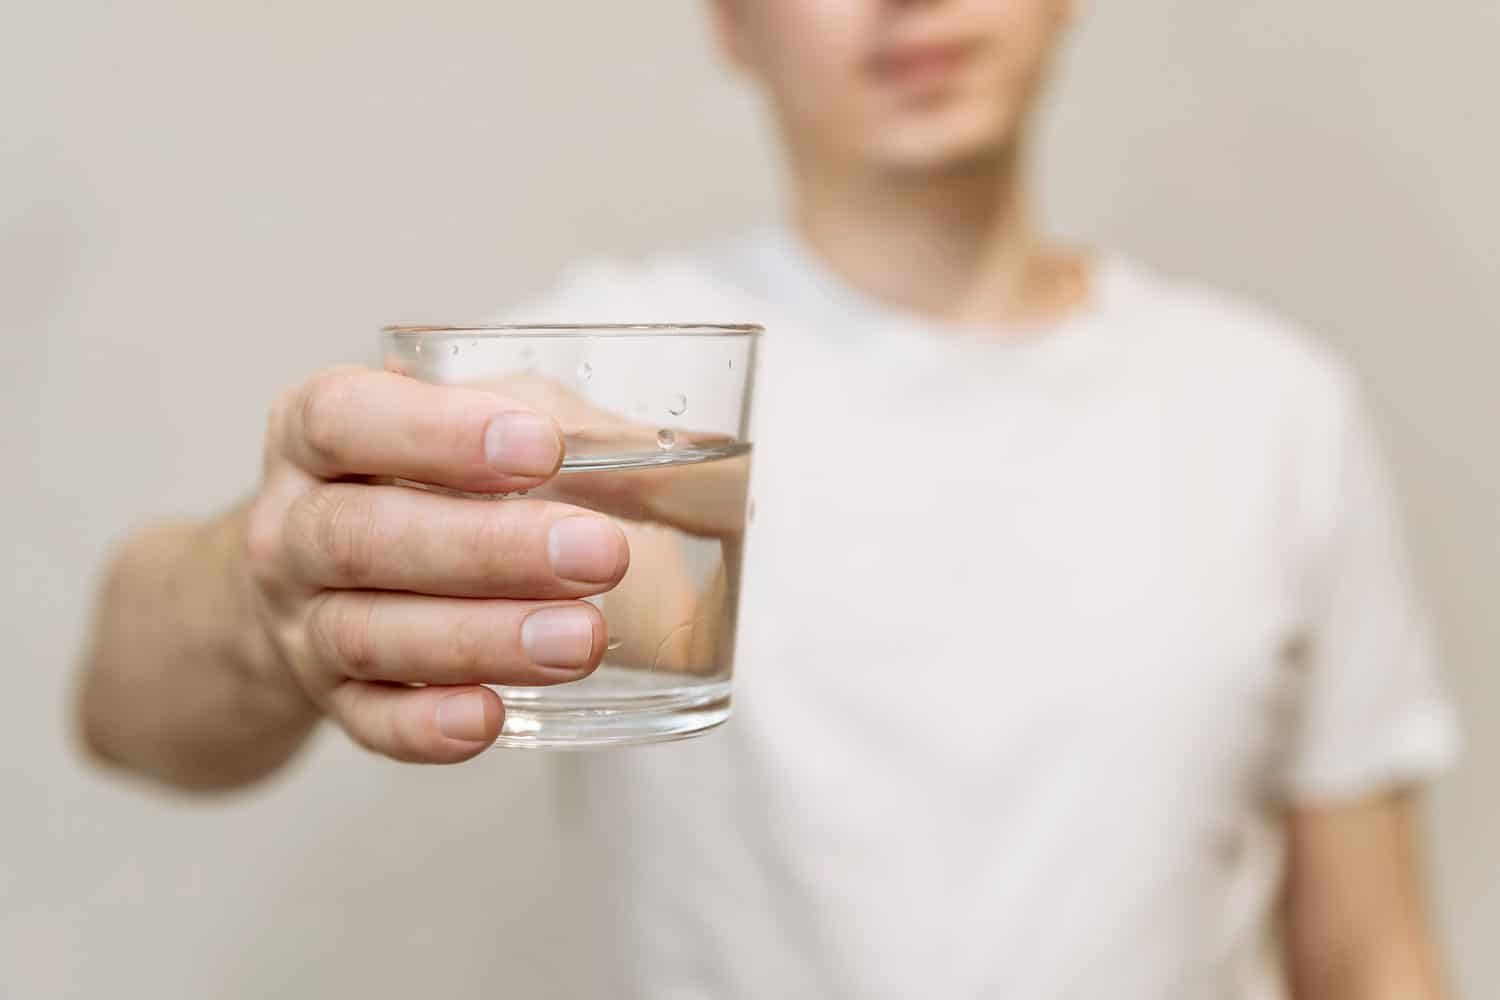 a young man in a white T-shirt holds a clear glass of clean drinking water